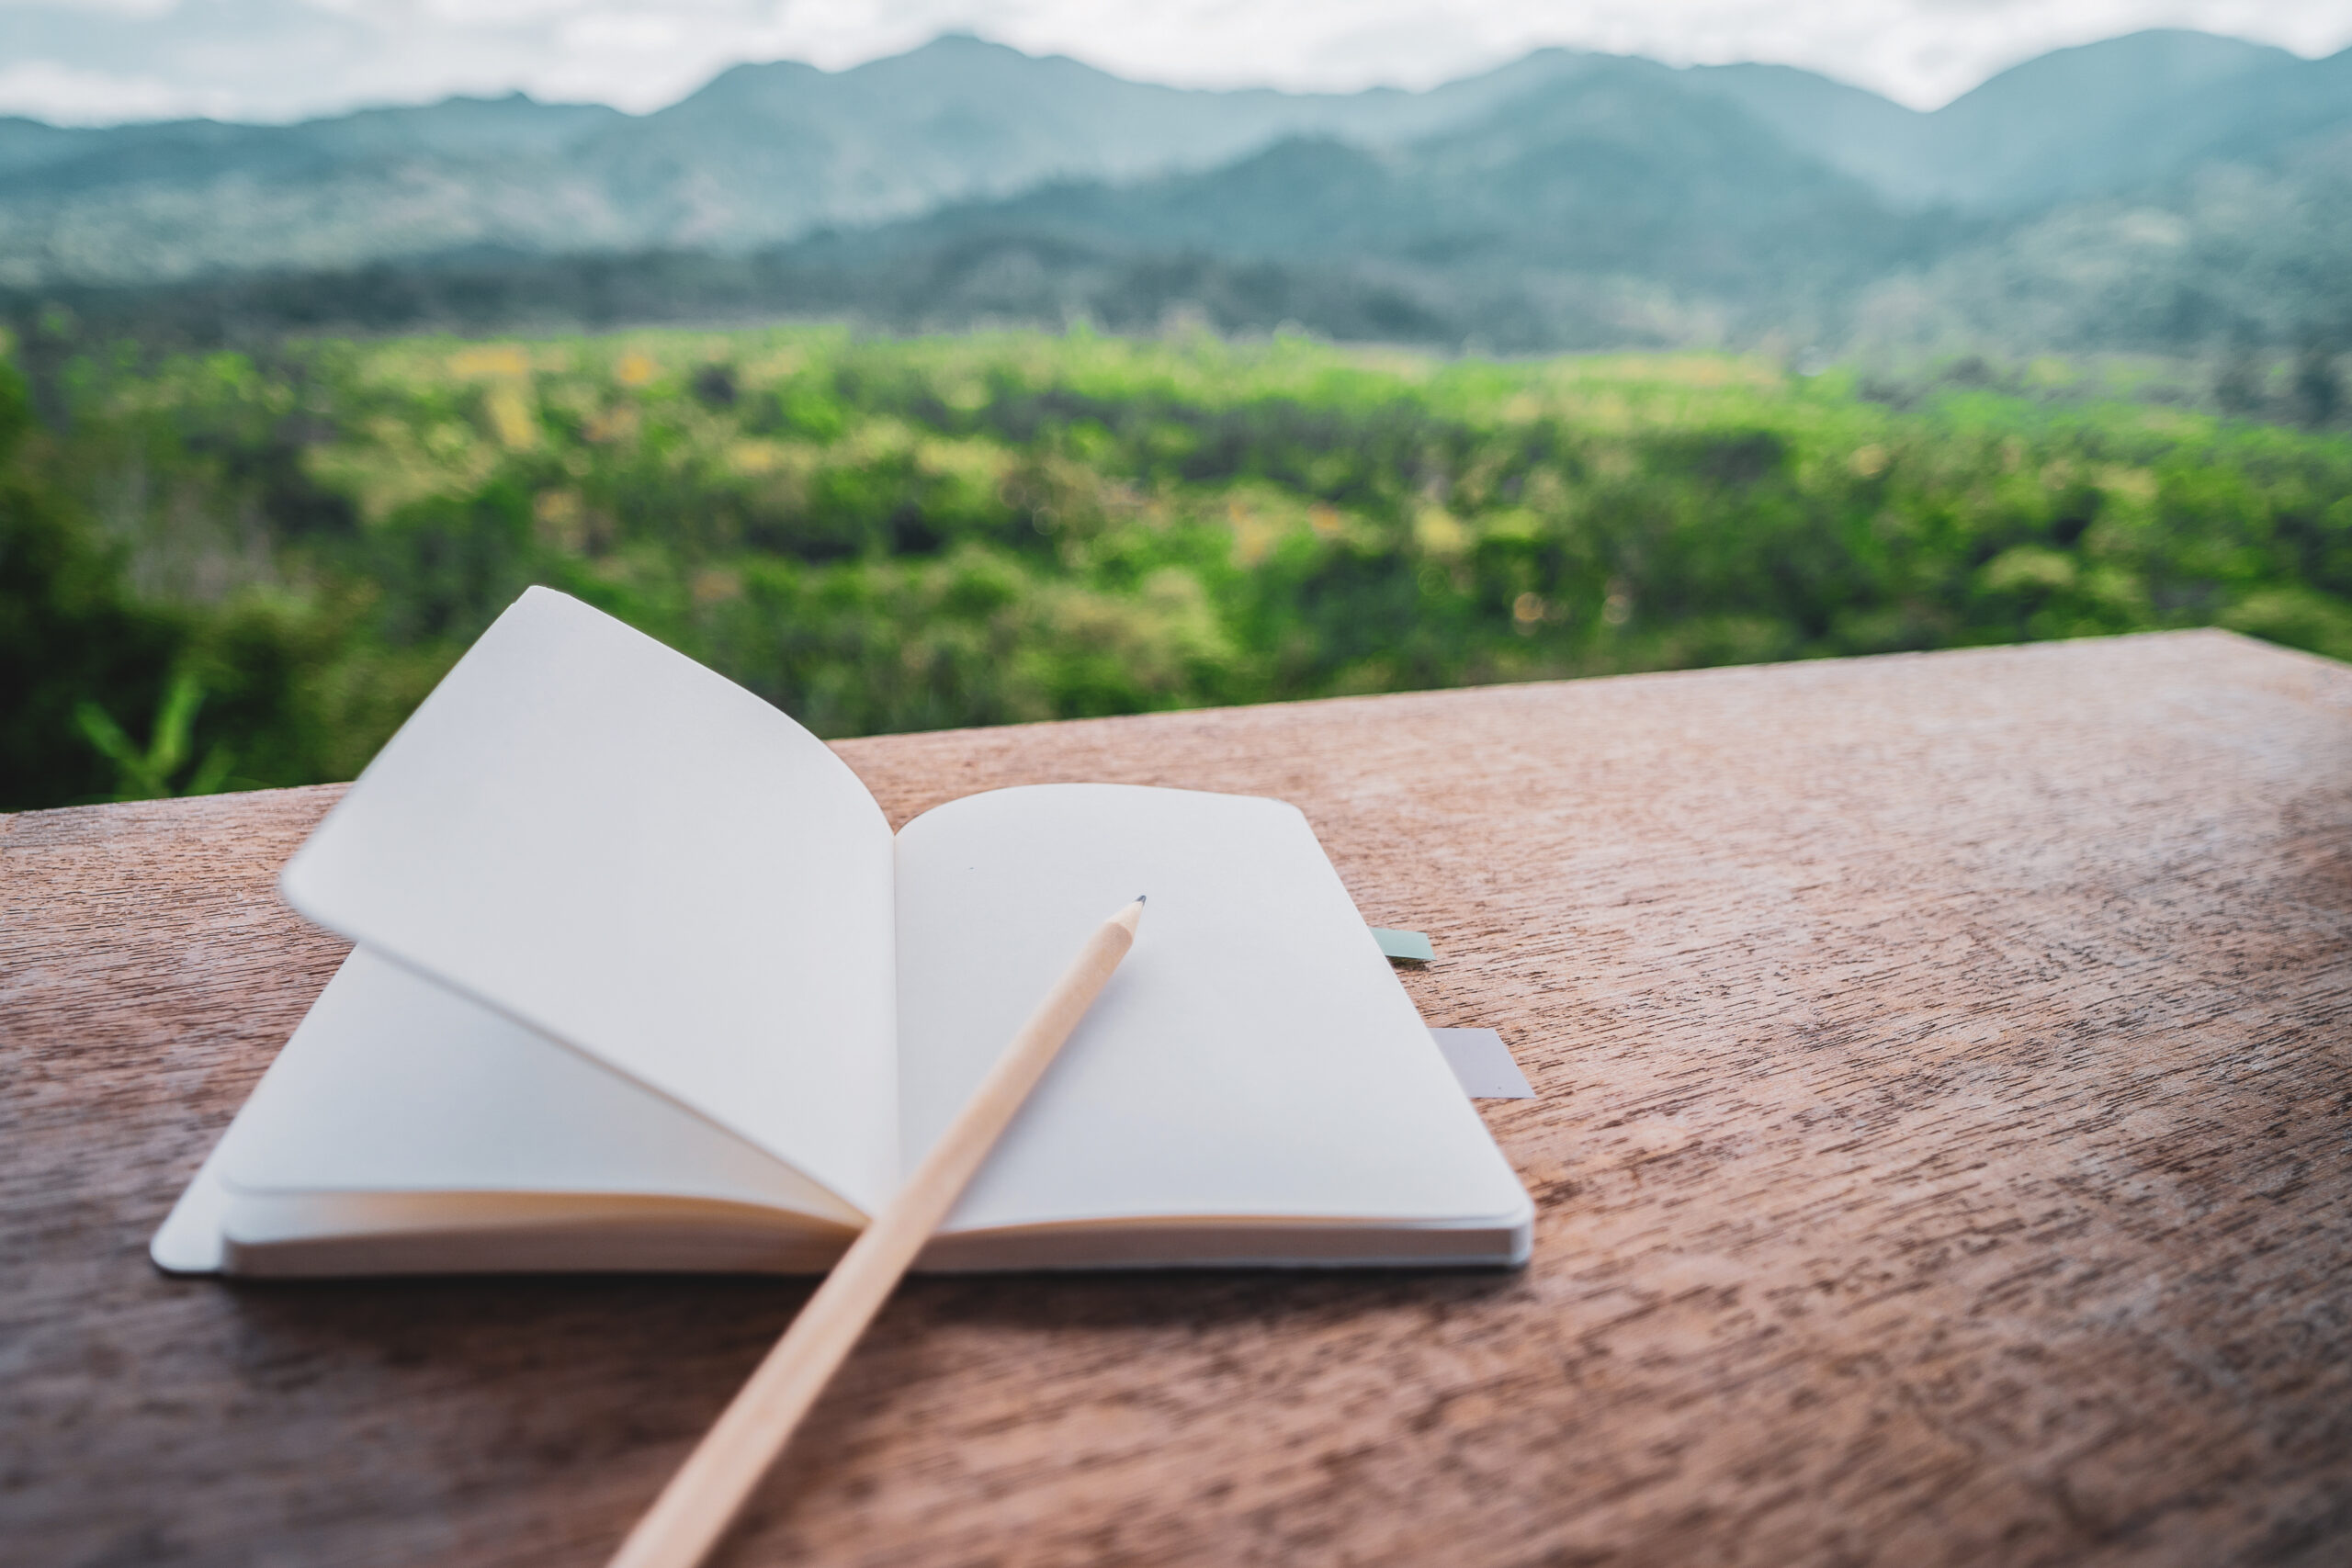 Notebook and pencil on wooden table with blur forrest and mountain background.